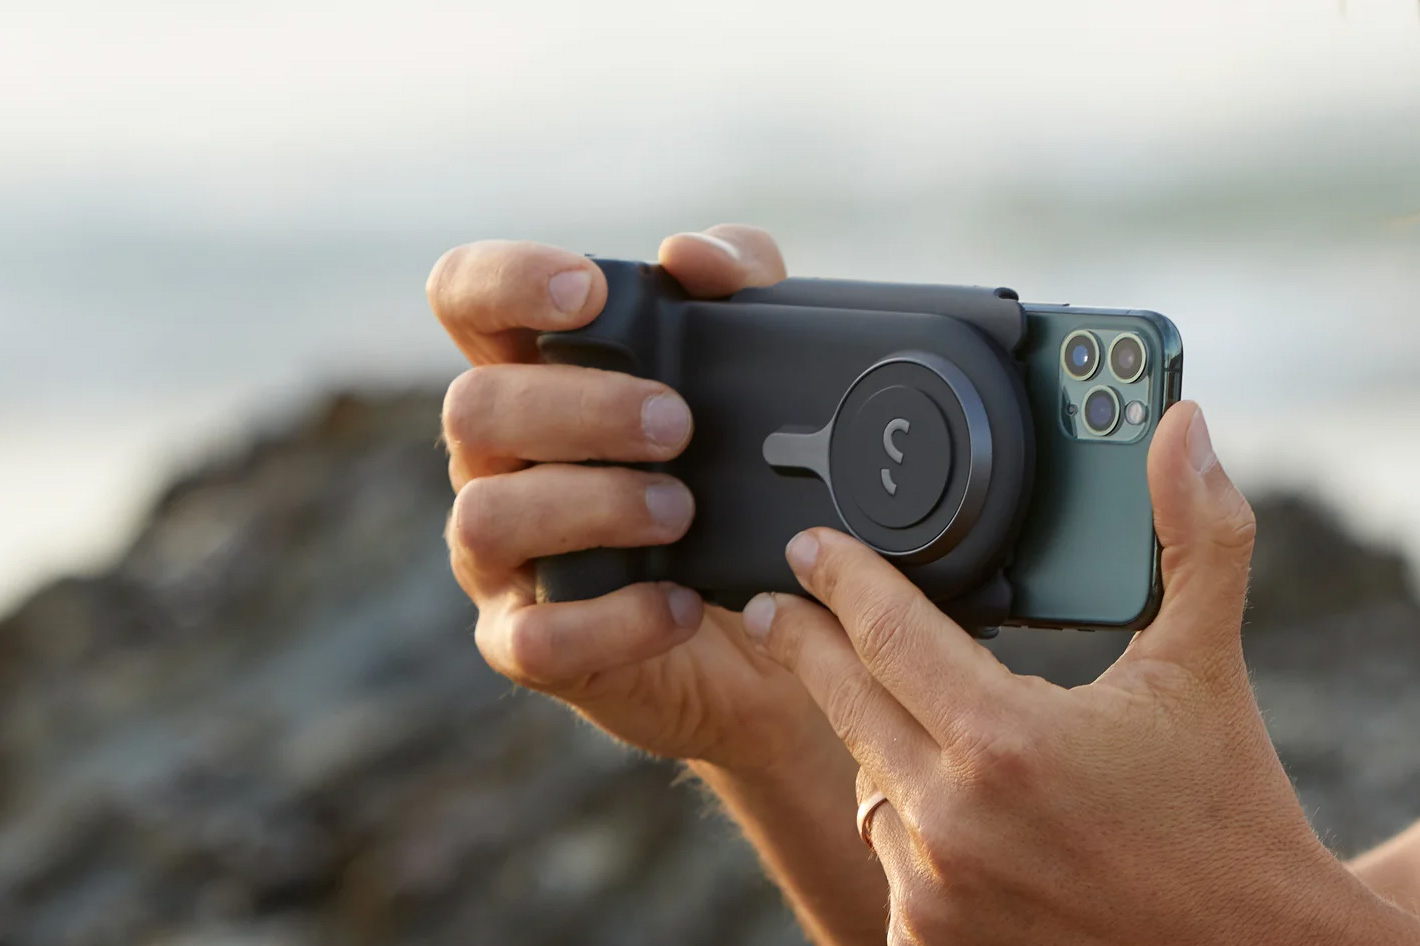 Need stability? Get a ShiftCam ProGrip for your smartphone by Jose